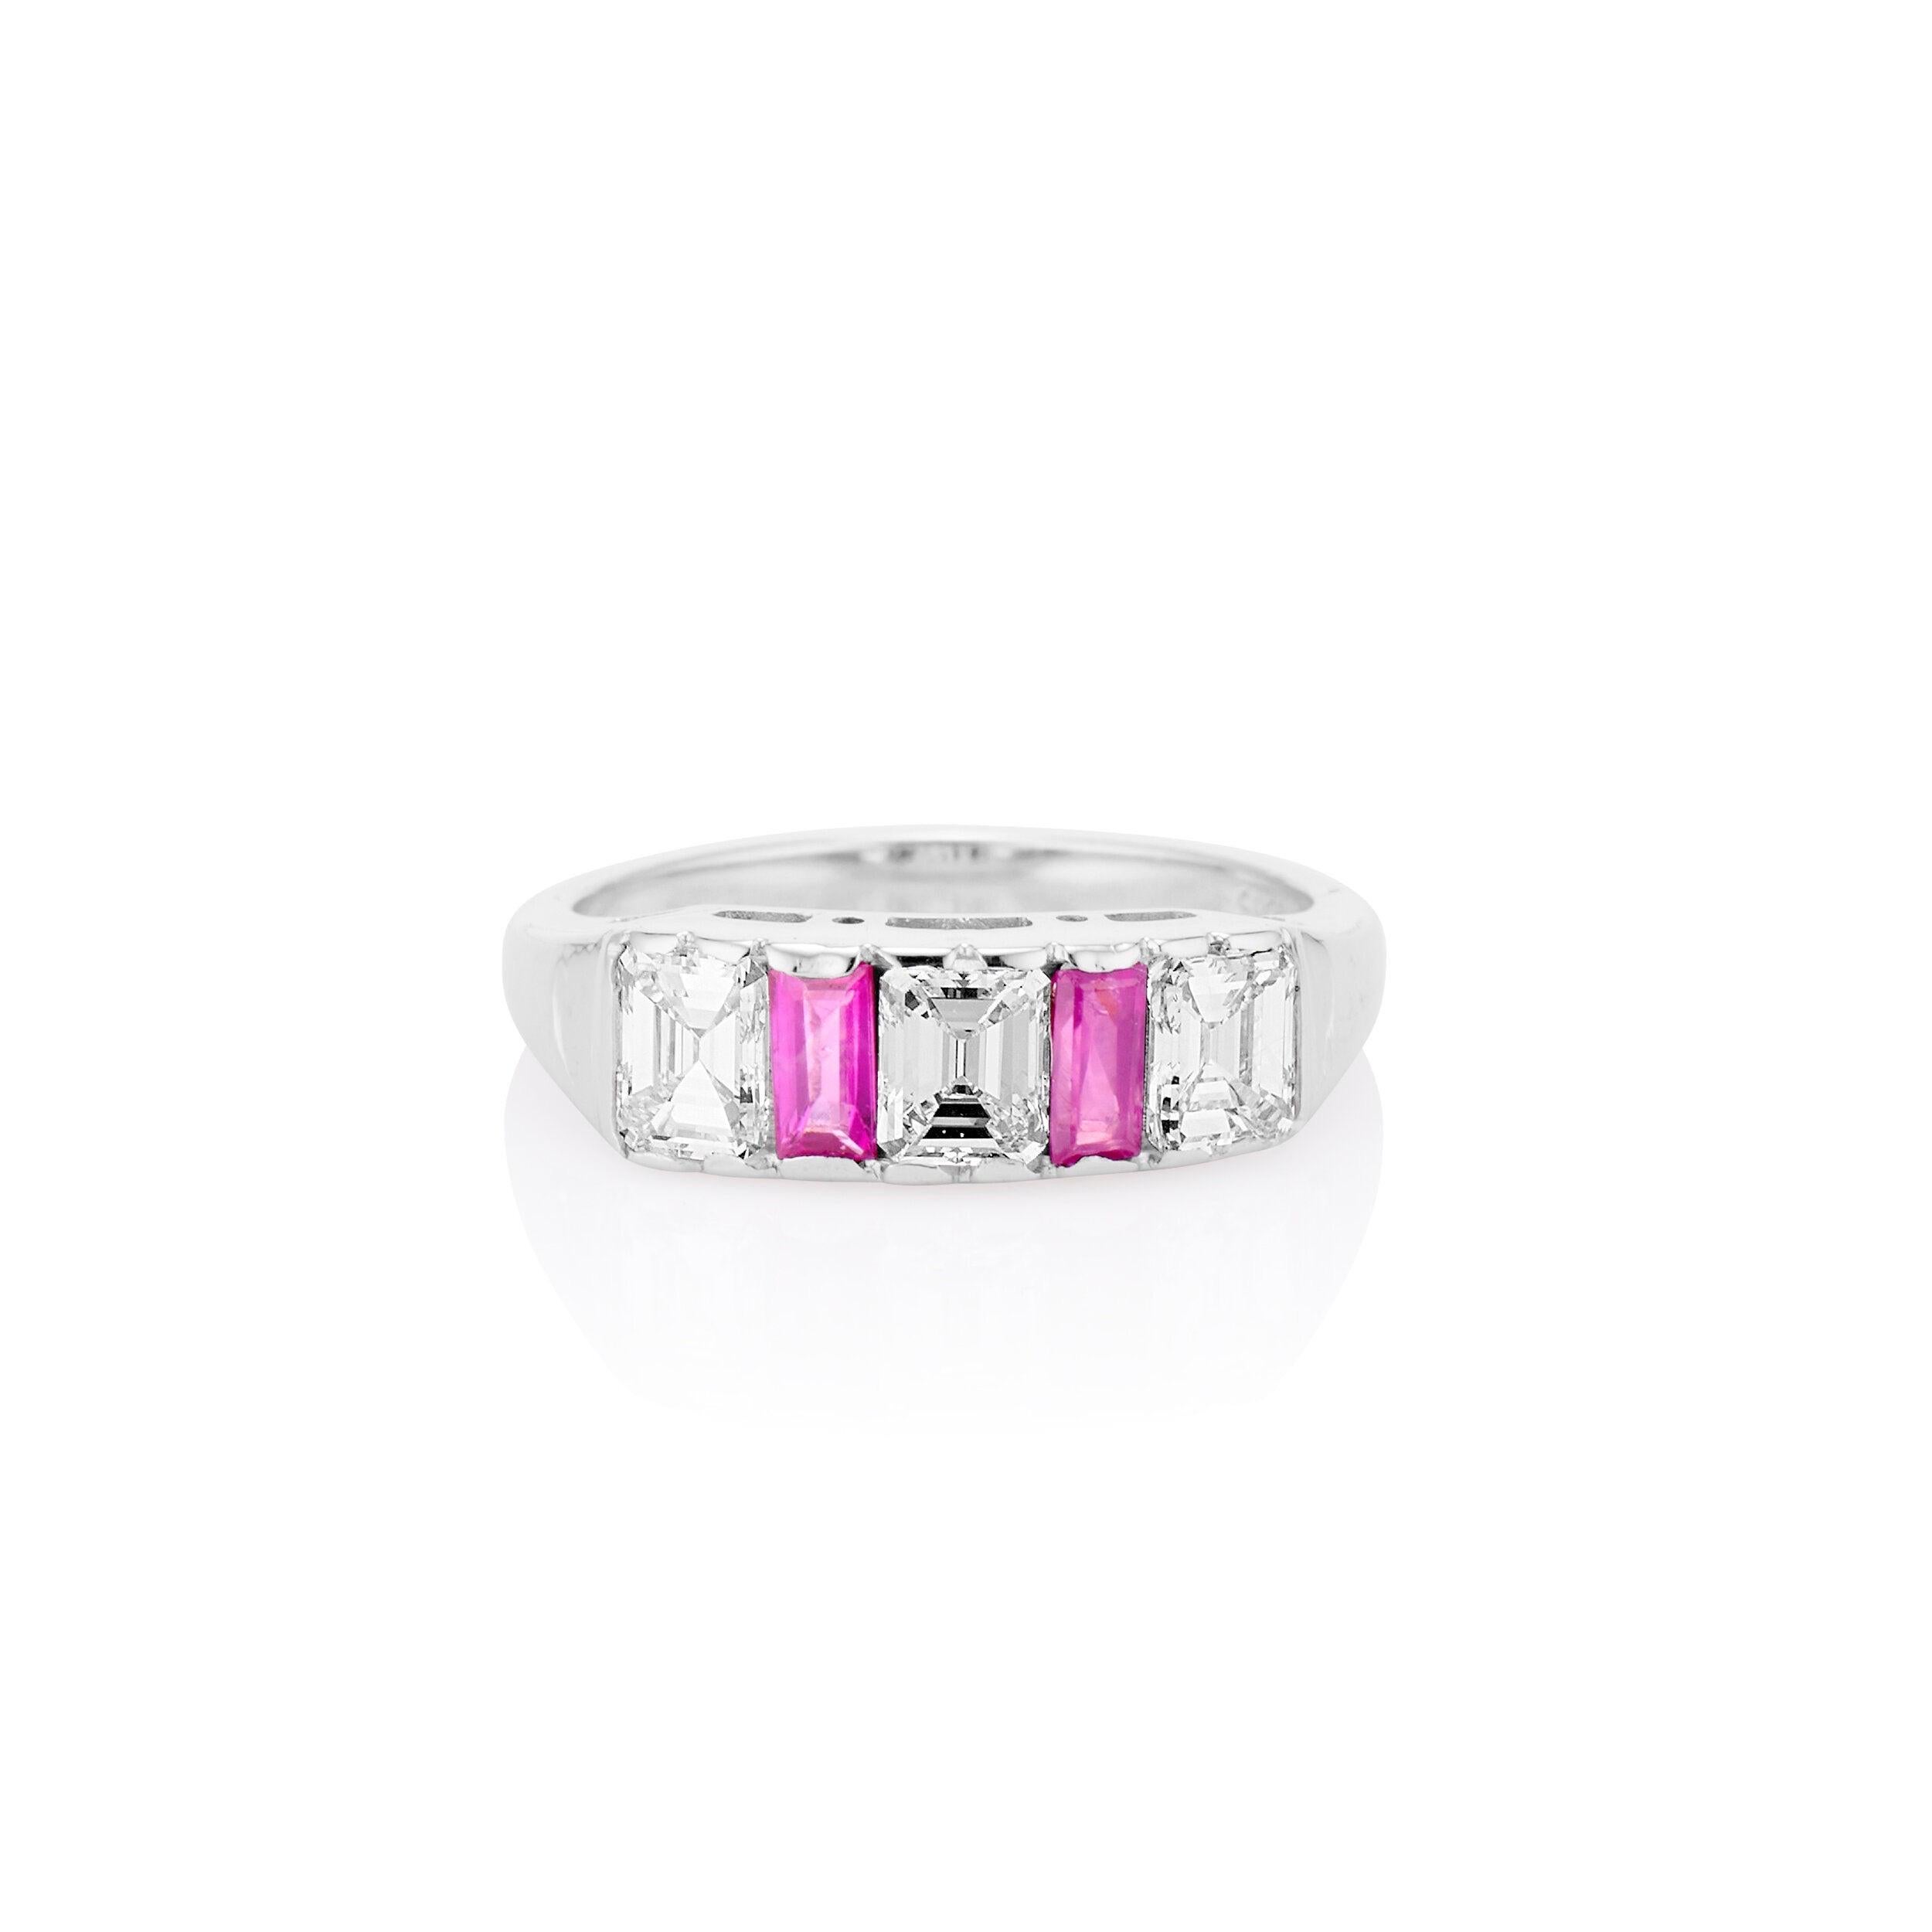 This sleek and stackable 1950’s ring by HWBT & Sons highlights three seamlessly-set bright-white emerald-cut diamonds, spaced vibrant natural rubies. Rendered in 14k white gold, this ring is currently a ring size 6.

 

Diamonds: emerald cuts,